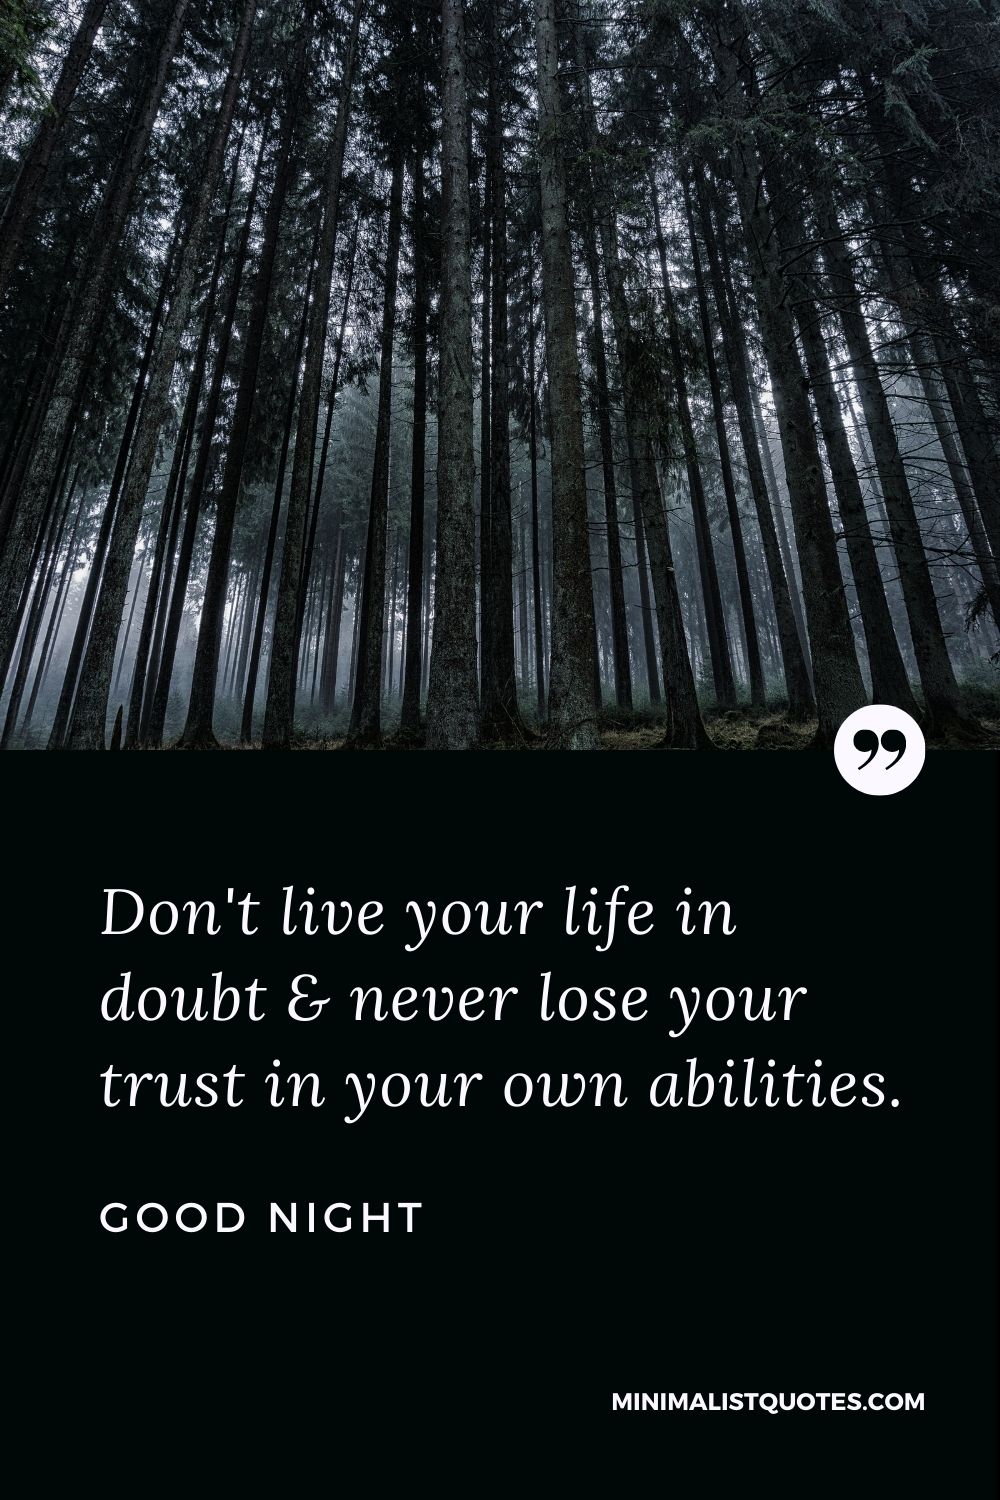 Good Night Wishes - Don't live your life in doubt & never lose your trust in your own abilities.